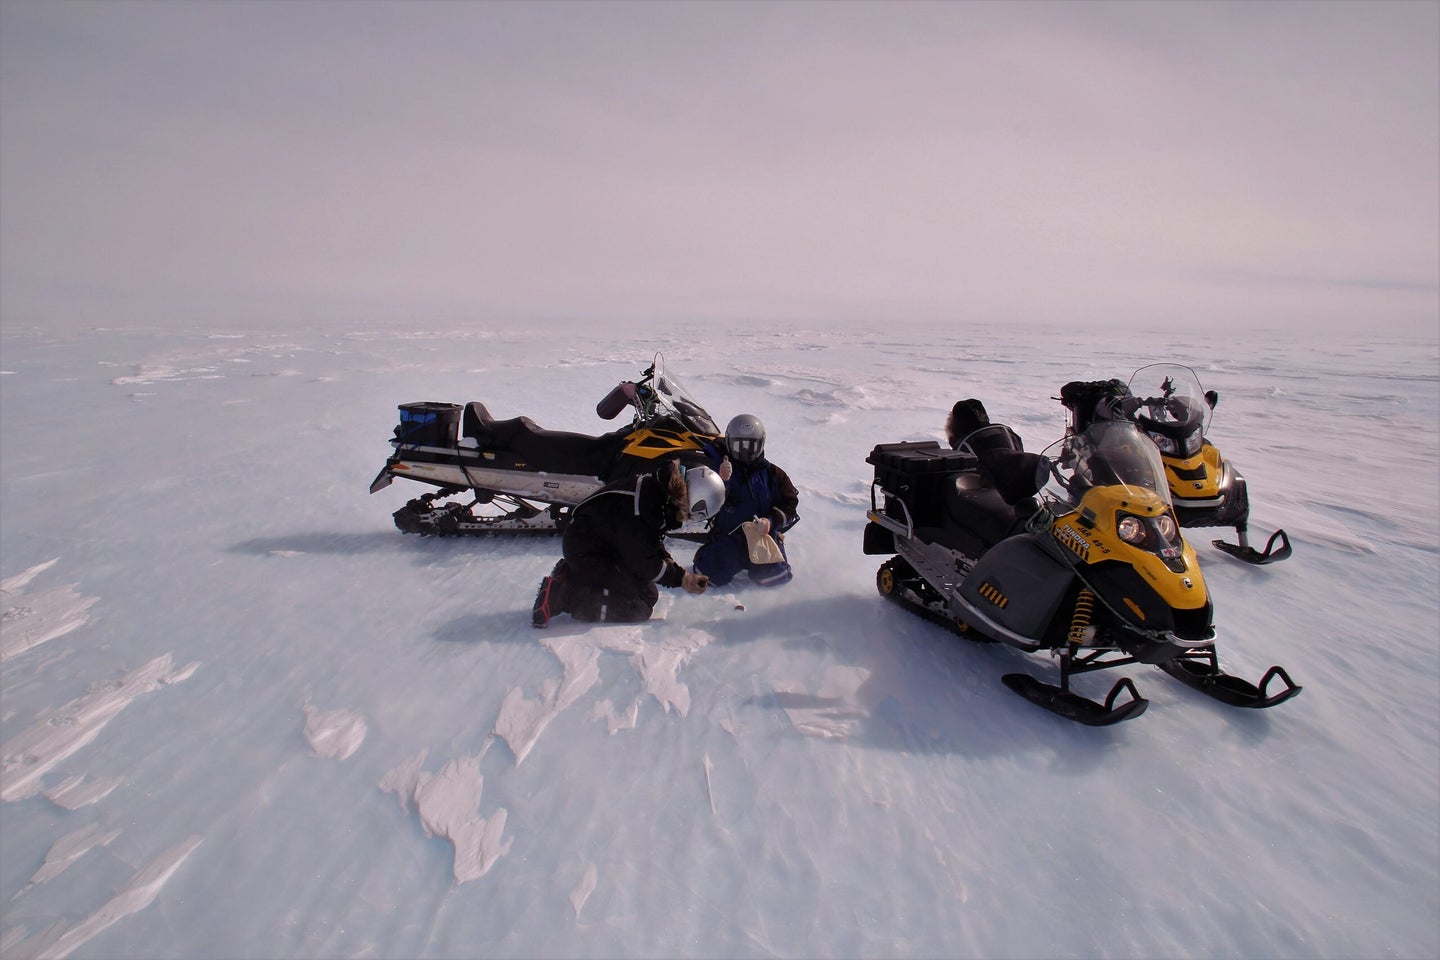 two researchers in winter gear crouch over a small rock in an icy windy landscape. next to them are yellow and black snow mobiles